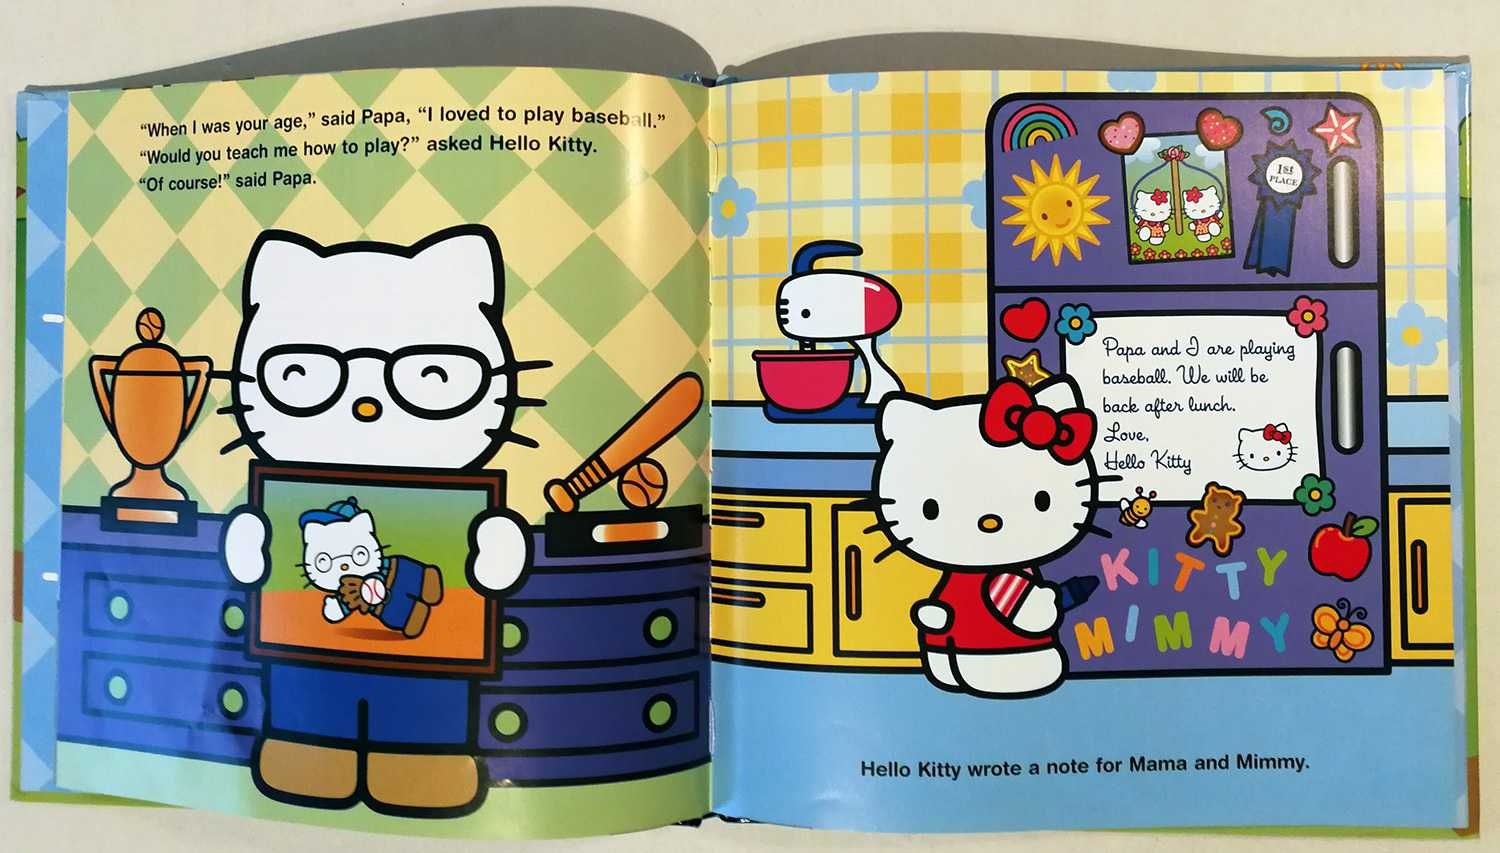 ### Hello Kitty - A day with Papa ###